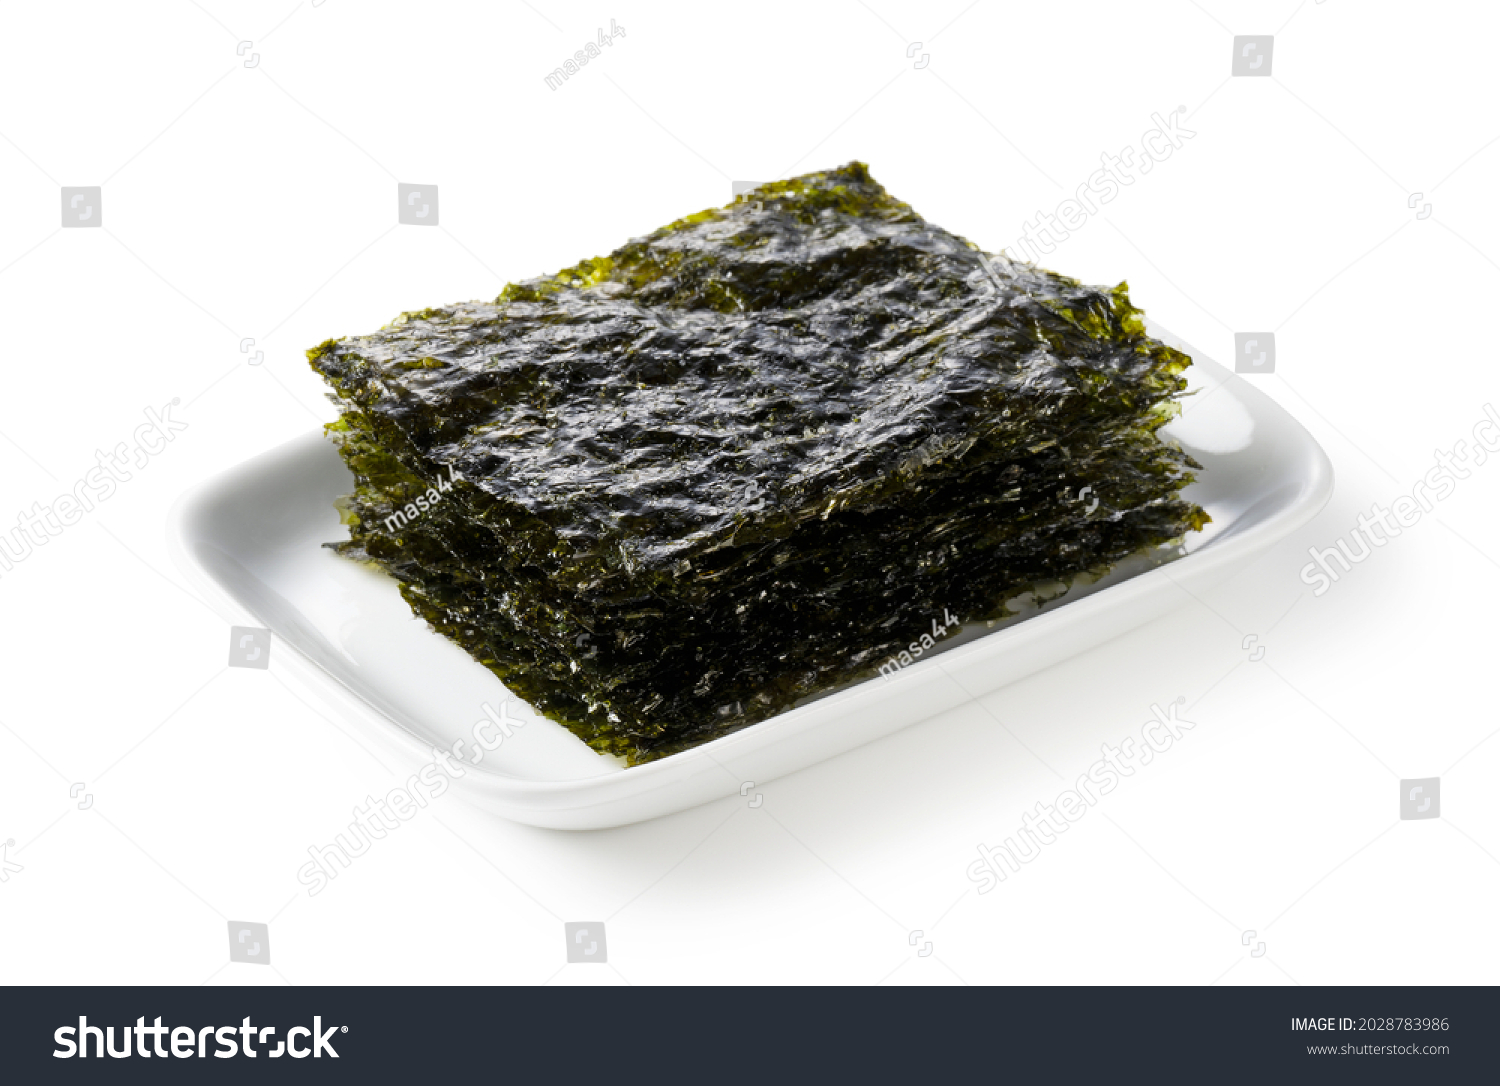 Korean seaweed on a plate set against a white background. #2028783986